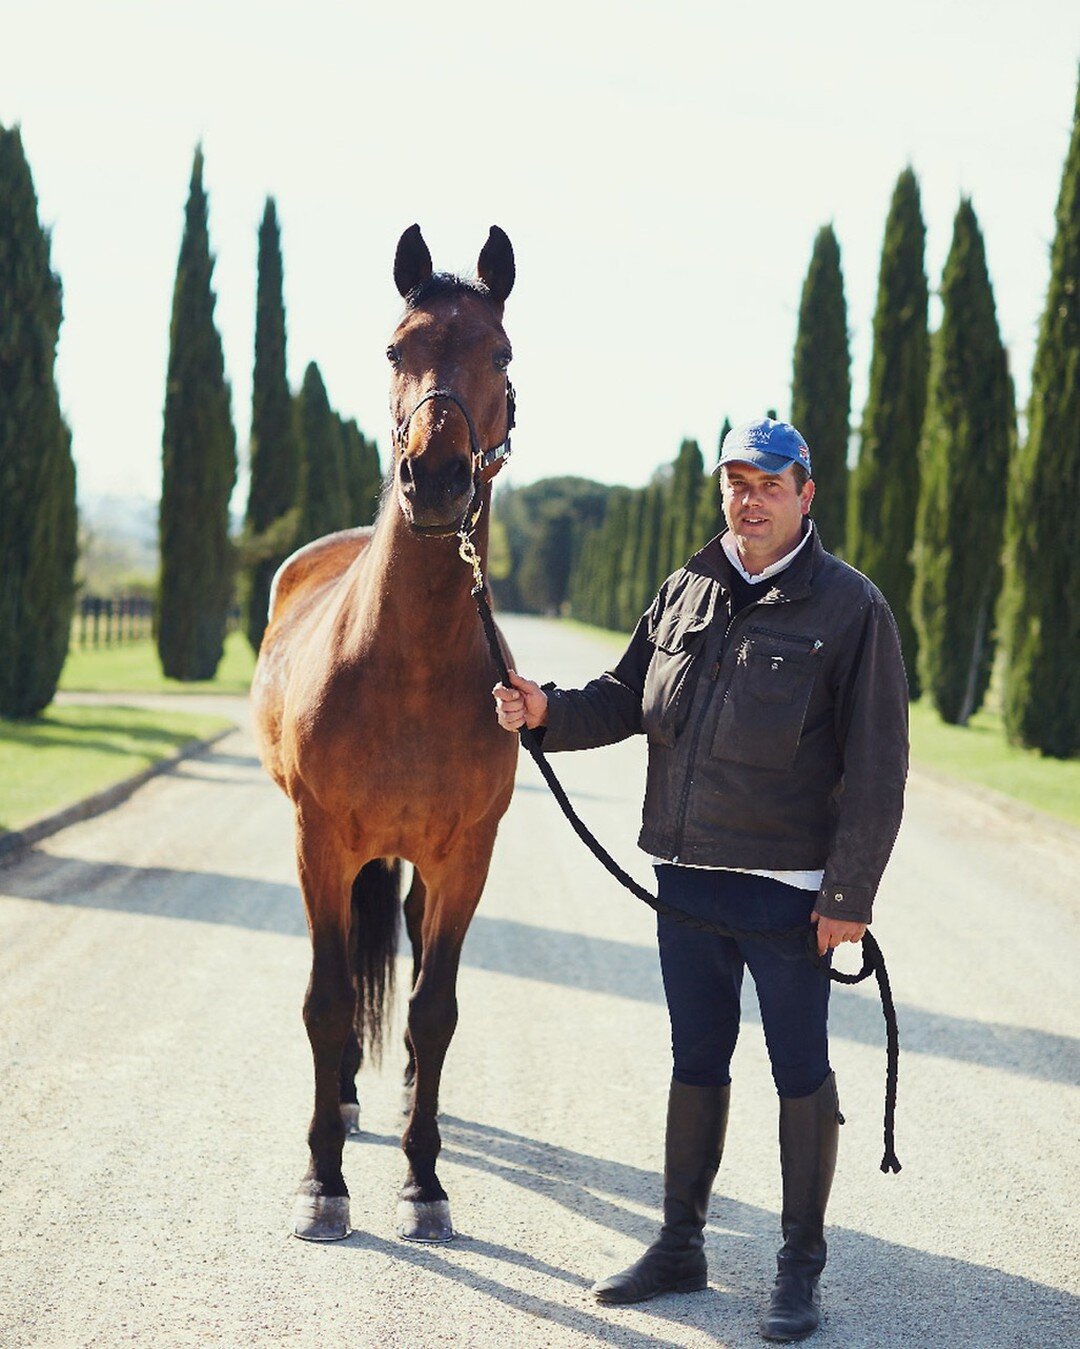 Such lovely memories of shooting at @ilborro in Tuscany!  I was lucky enough to take a ride into the verdant fields and orchards on my day off.⠀⠀⠀⠀⠀⠀⠀⠀⠀
.⠀⠀⠀⠀⠀⠀⠀⠀⠀
. ⠀⠀⠀⠀⠀⠀⠀⠀⠀
#horsestyle #horseaddict #horsesofinsta #horserider #myhorse #horselovers 